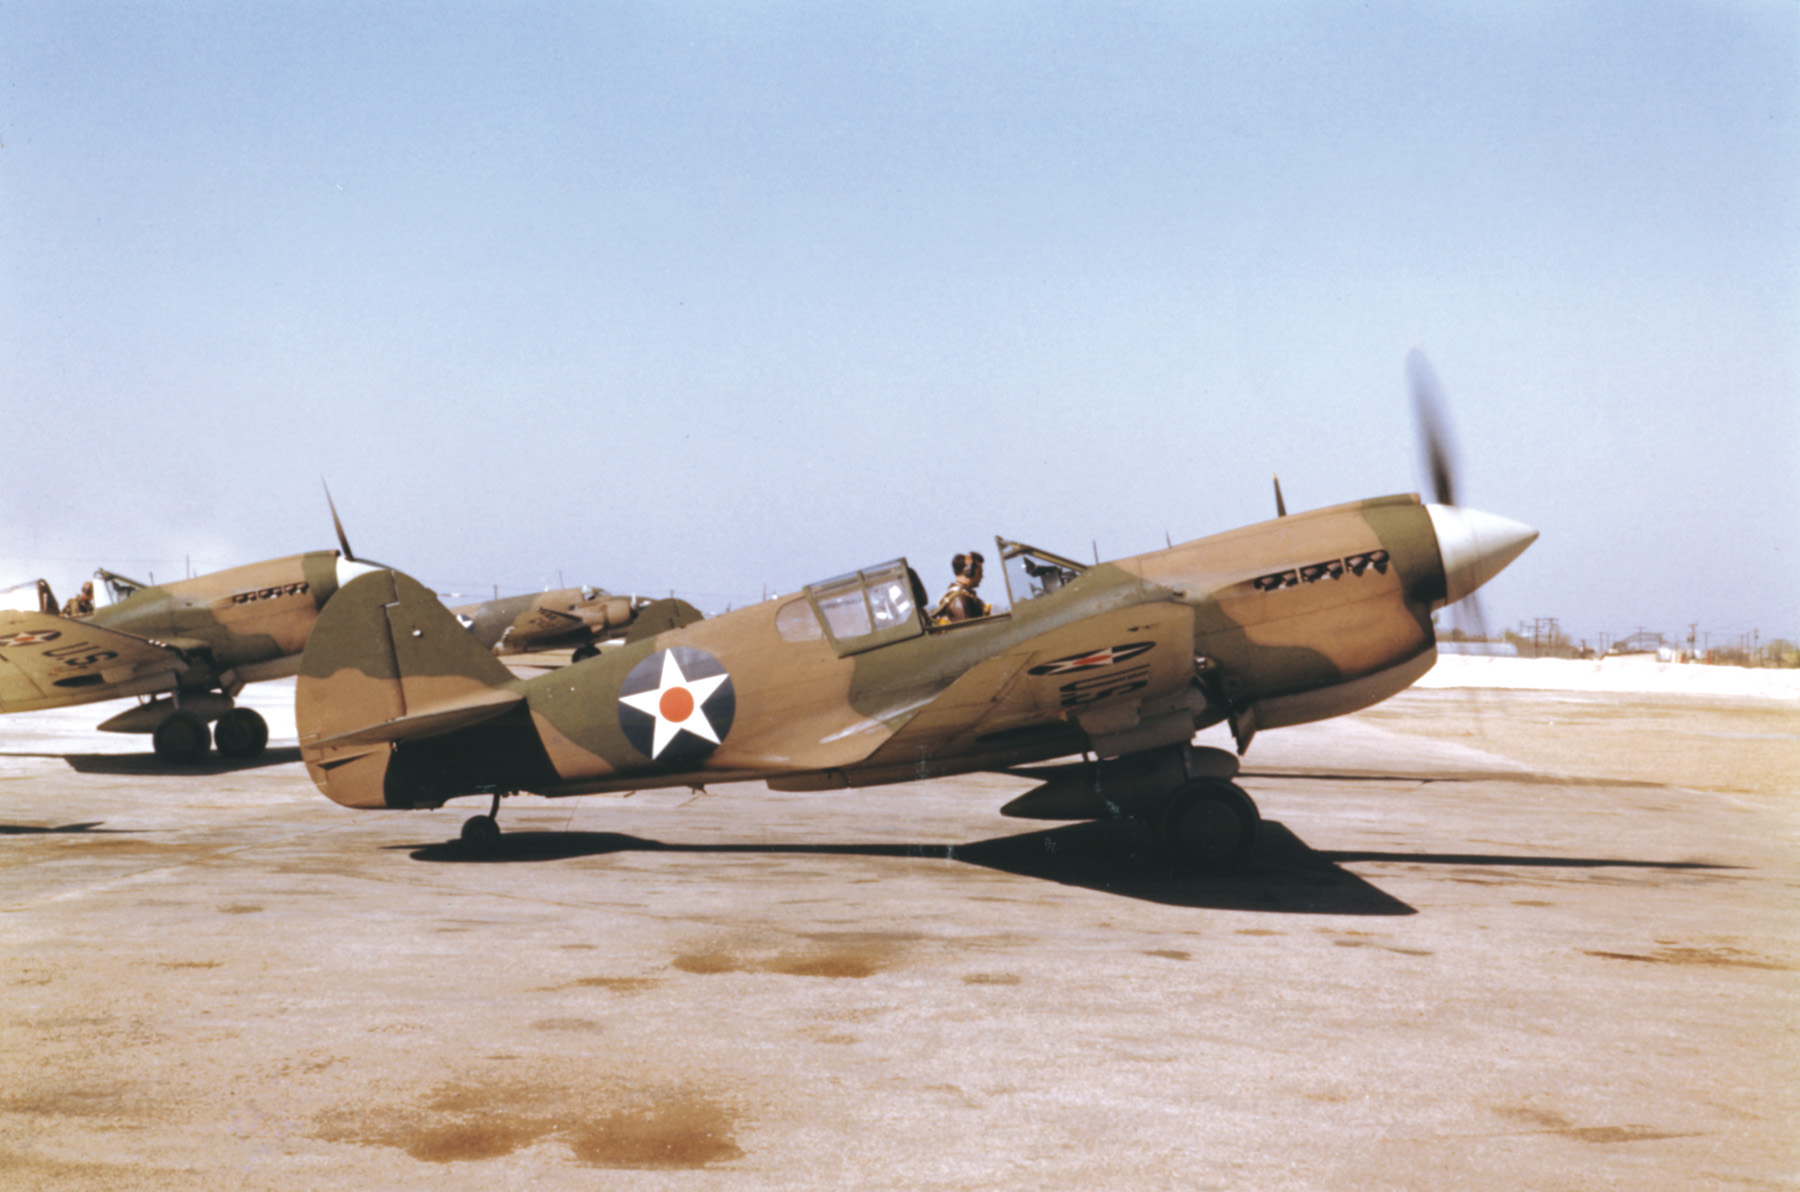 U.S. forces in the Philippines received the Curtiss P-40 Tomohawk fighter as a replacement for the aging P-26.